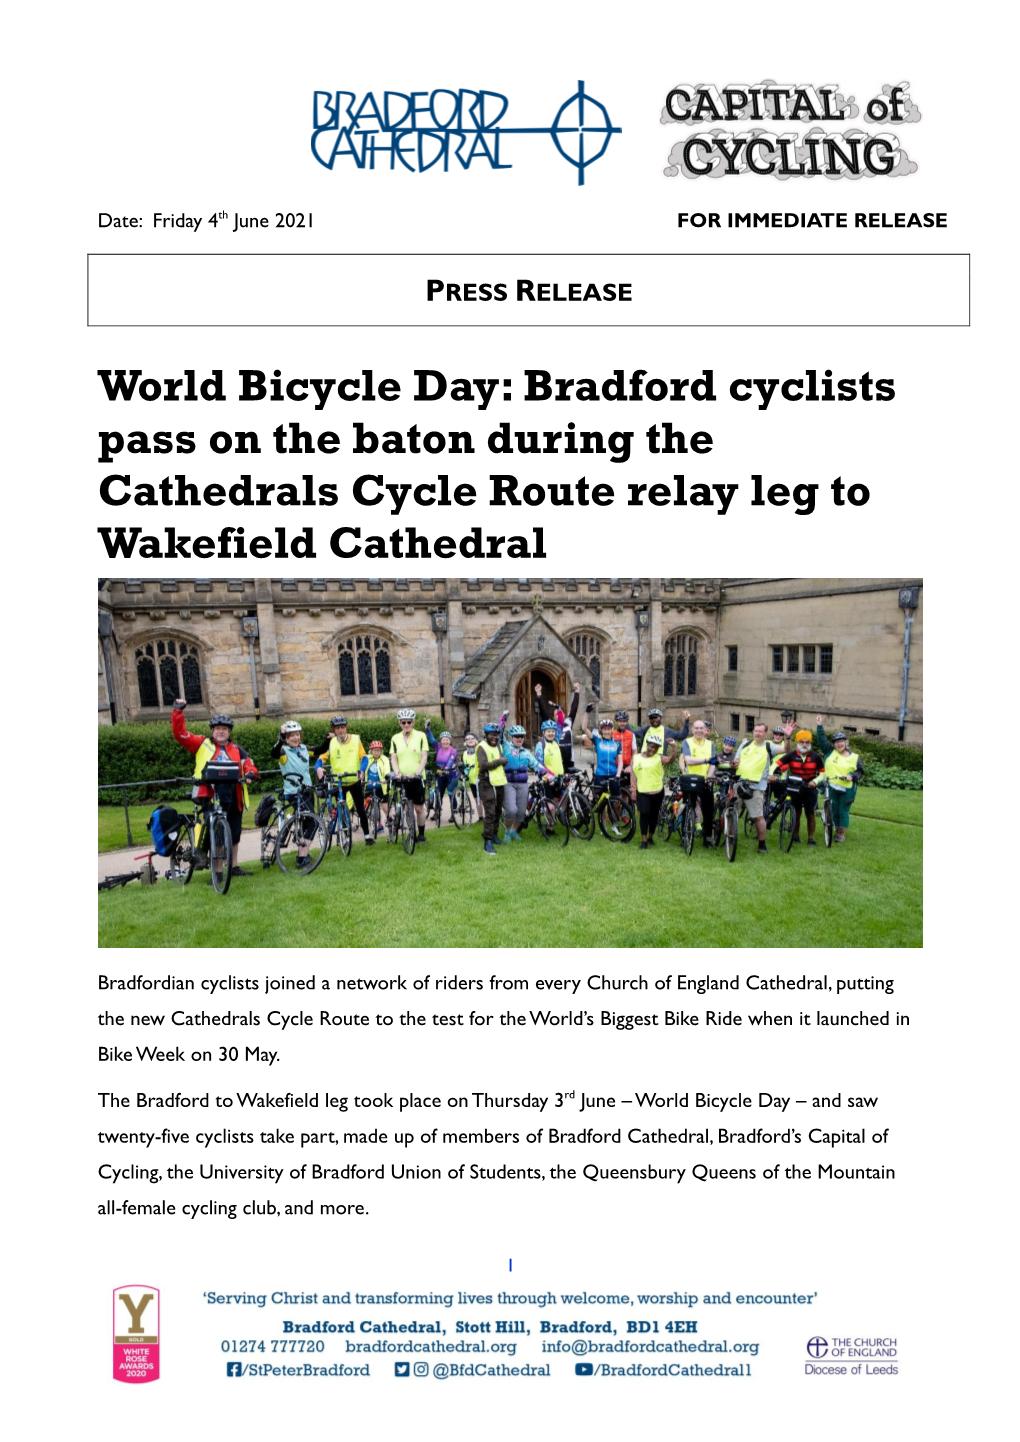 World Bicycle Day: Bradford Cyclists Pass on the Baton During the Cathedrals Cycle Route Relay Leg to Wakefield Cathedral